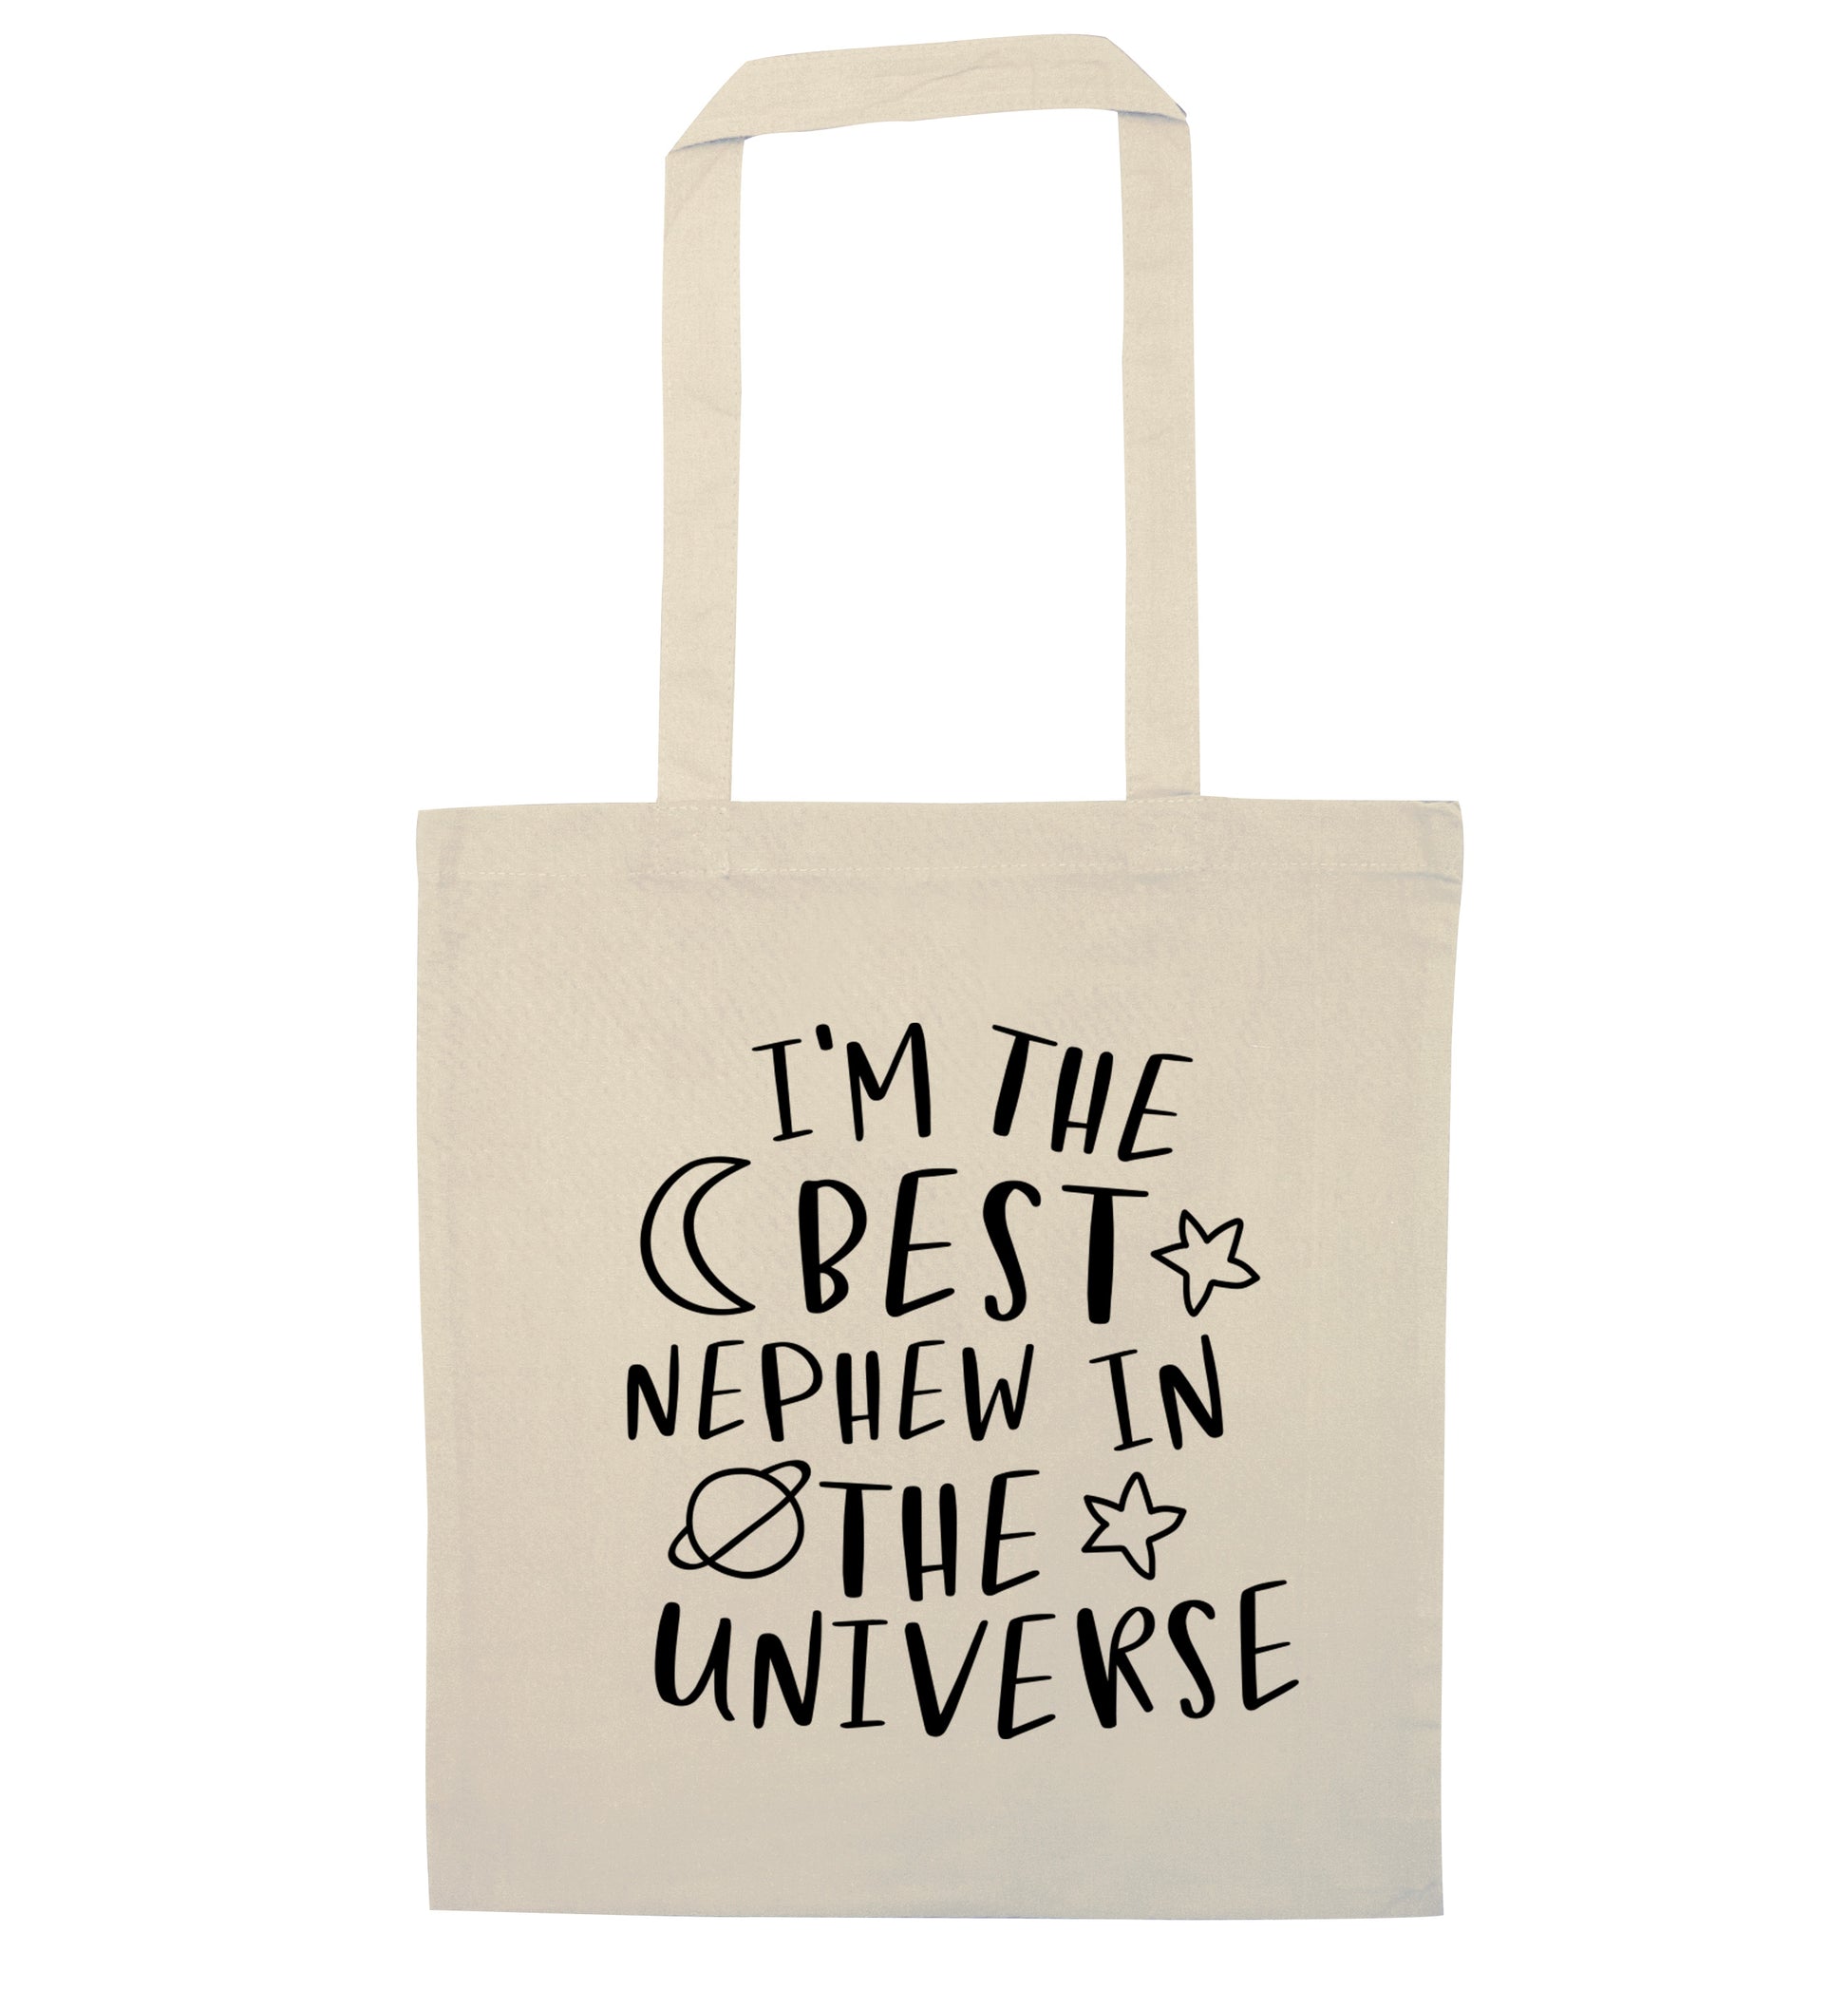 I'm the best nephew in the universe natural tote bag